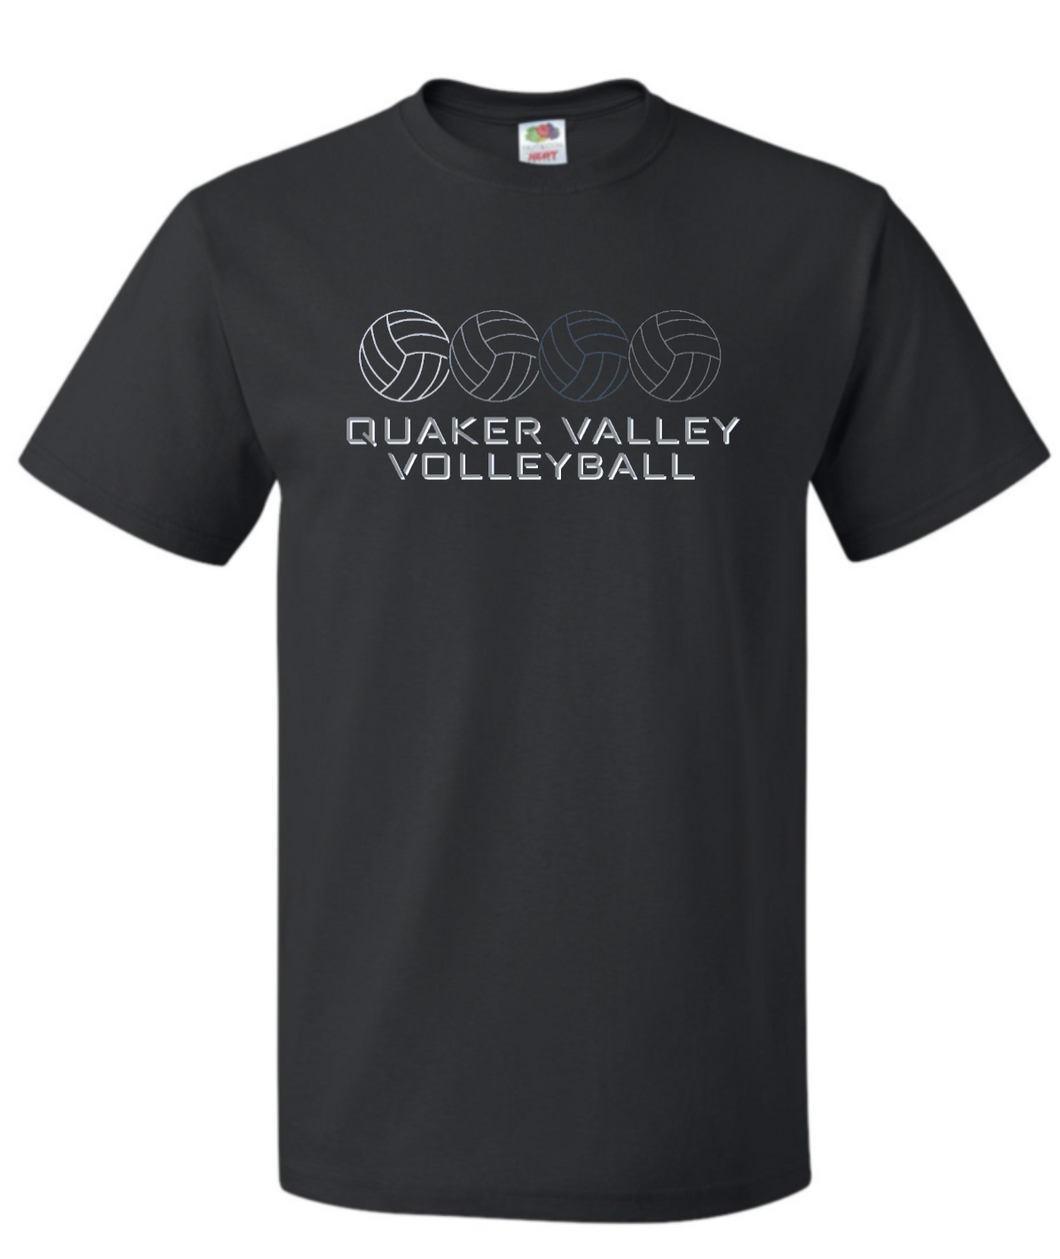 QUAKER VALLEY VOLLEYBALL COTTON JERSEY YOUTH & ADULT SHORT SLEEVE TEE